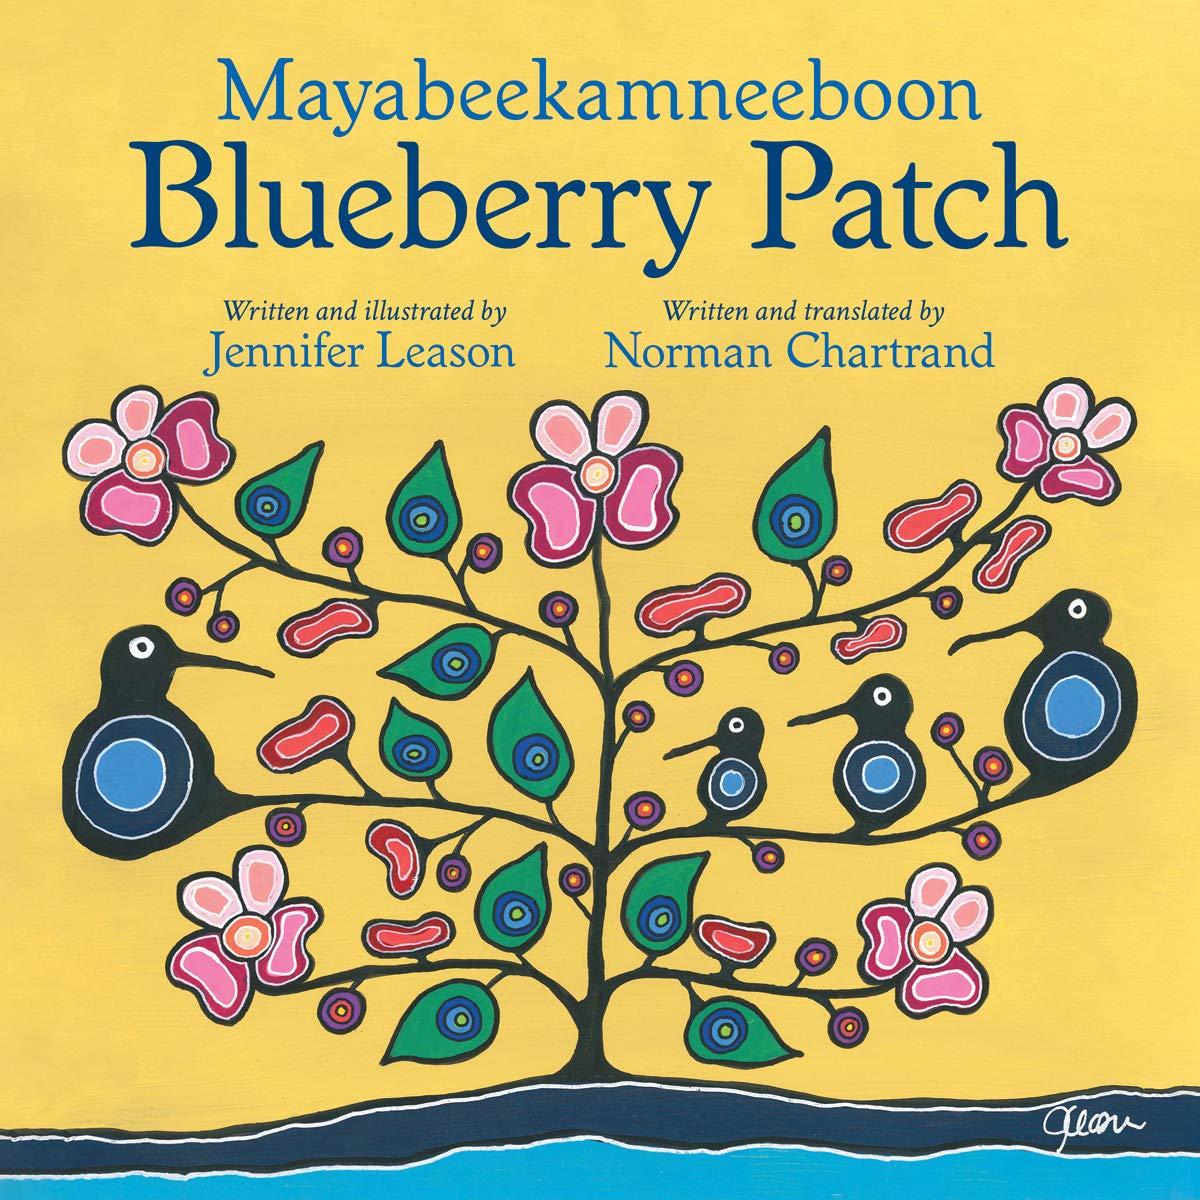 cover art for blueberry patch by jennifer leason and norman chartrand